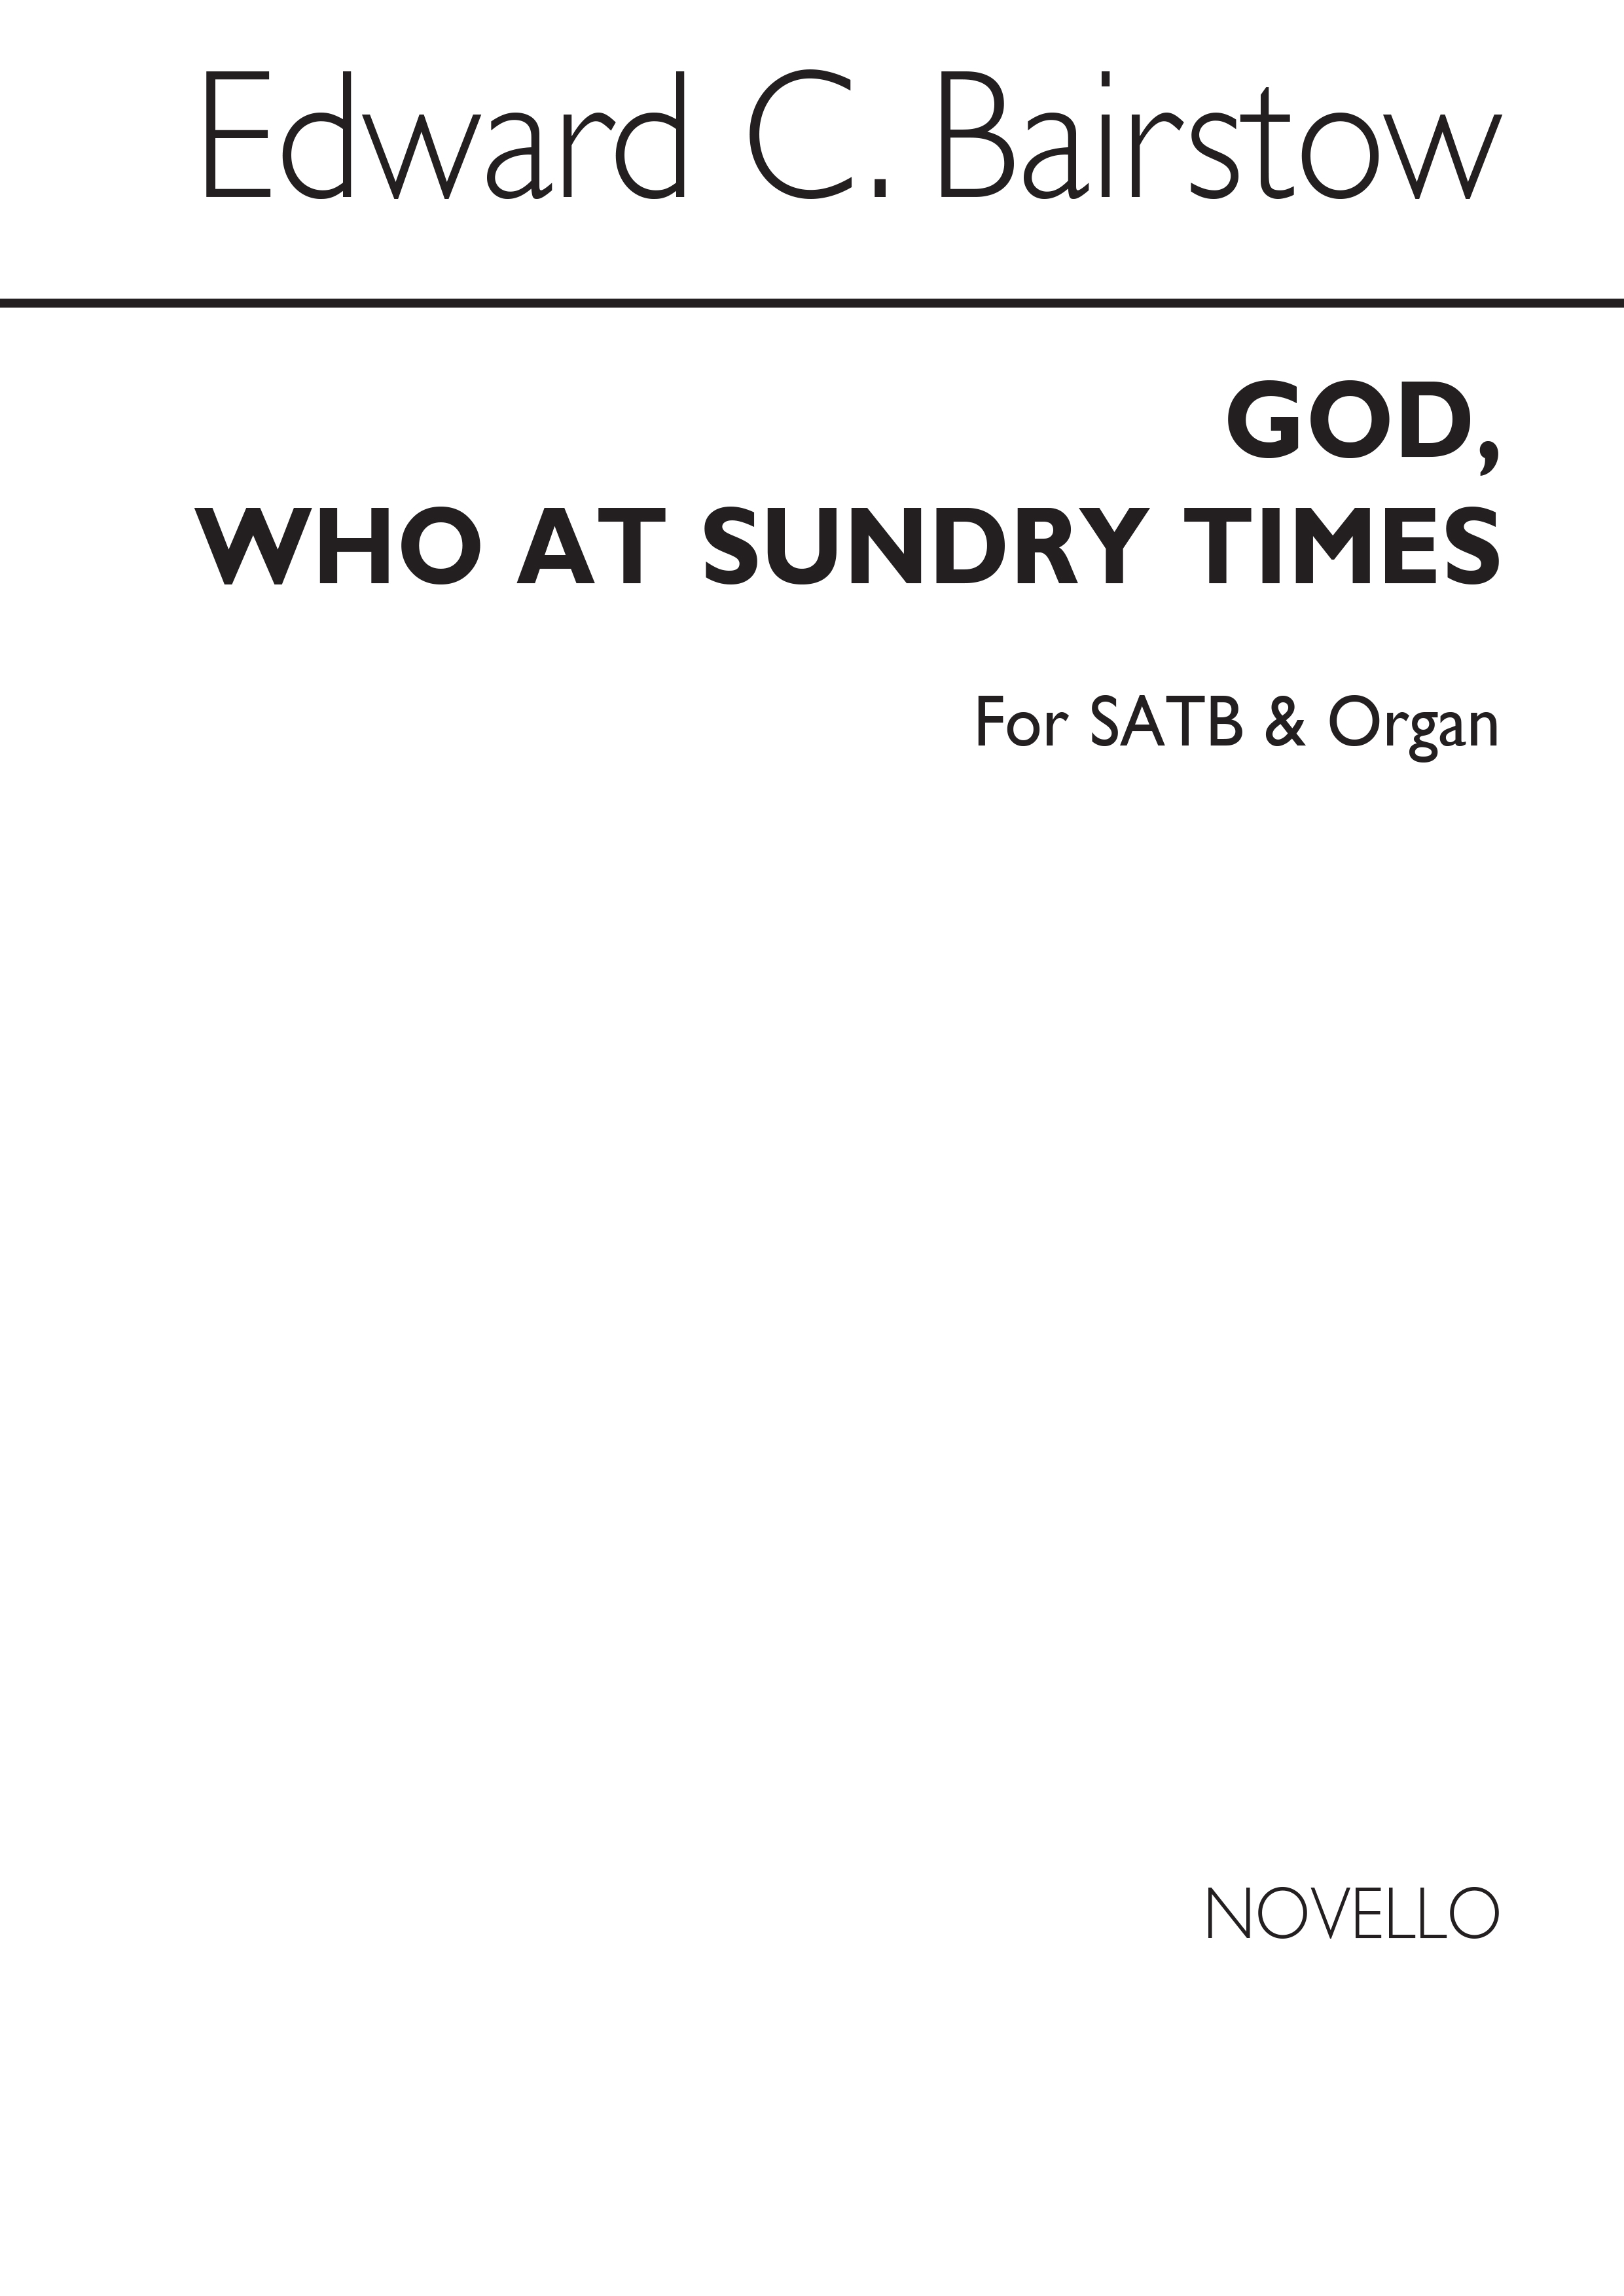 Bairstow: God Who At Sundry Times for SATB Chorus with Organ accompaniment